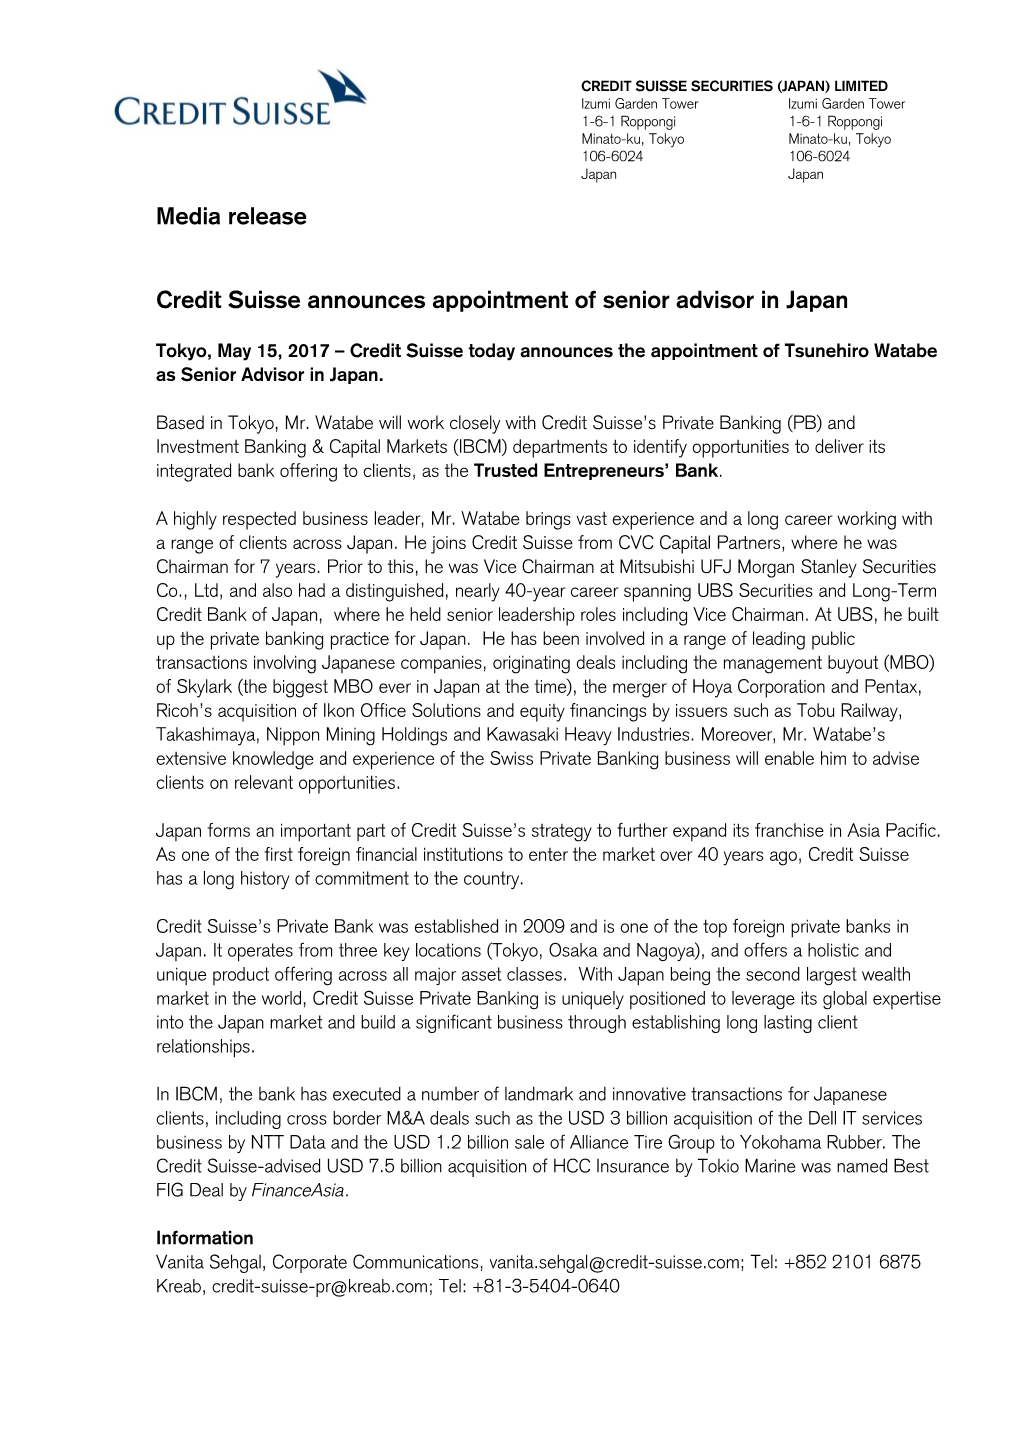 Credit Suisse Announces Appointment of Senior Advisor in Japan